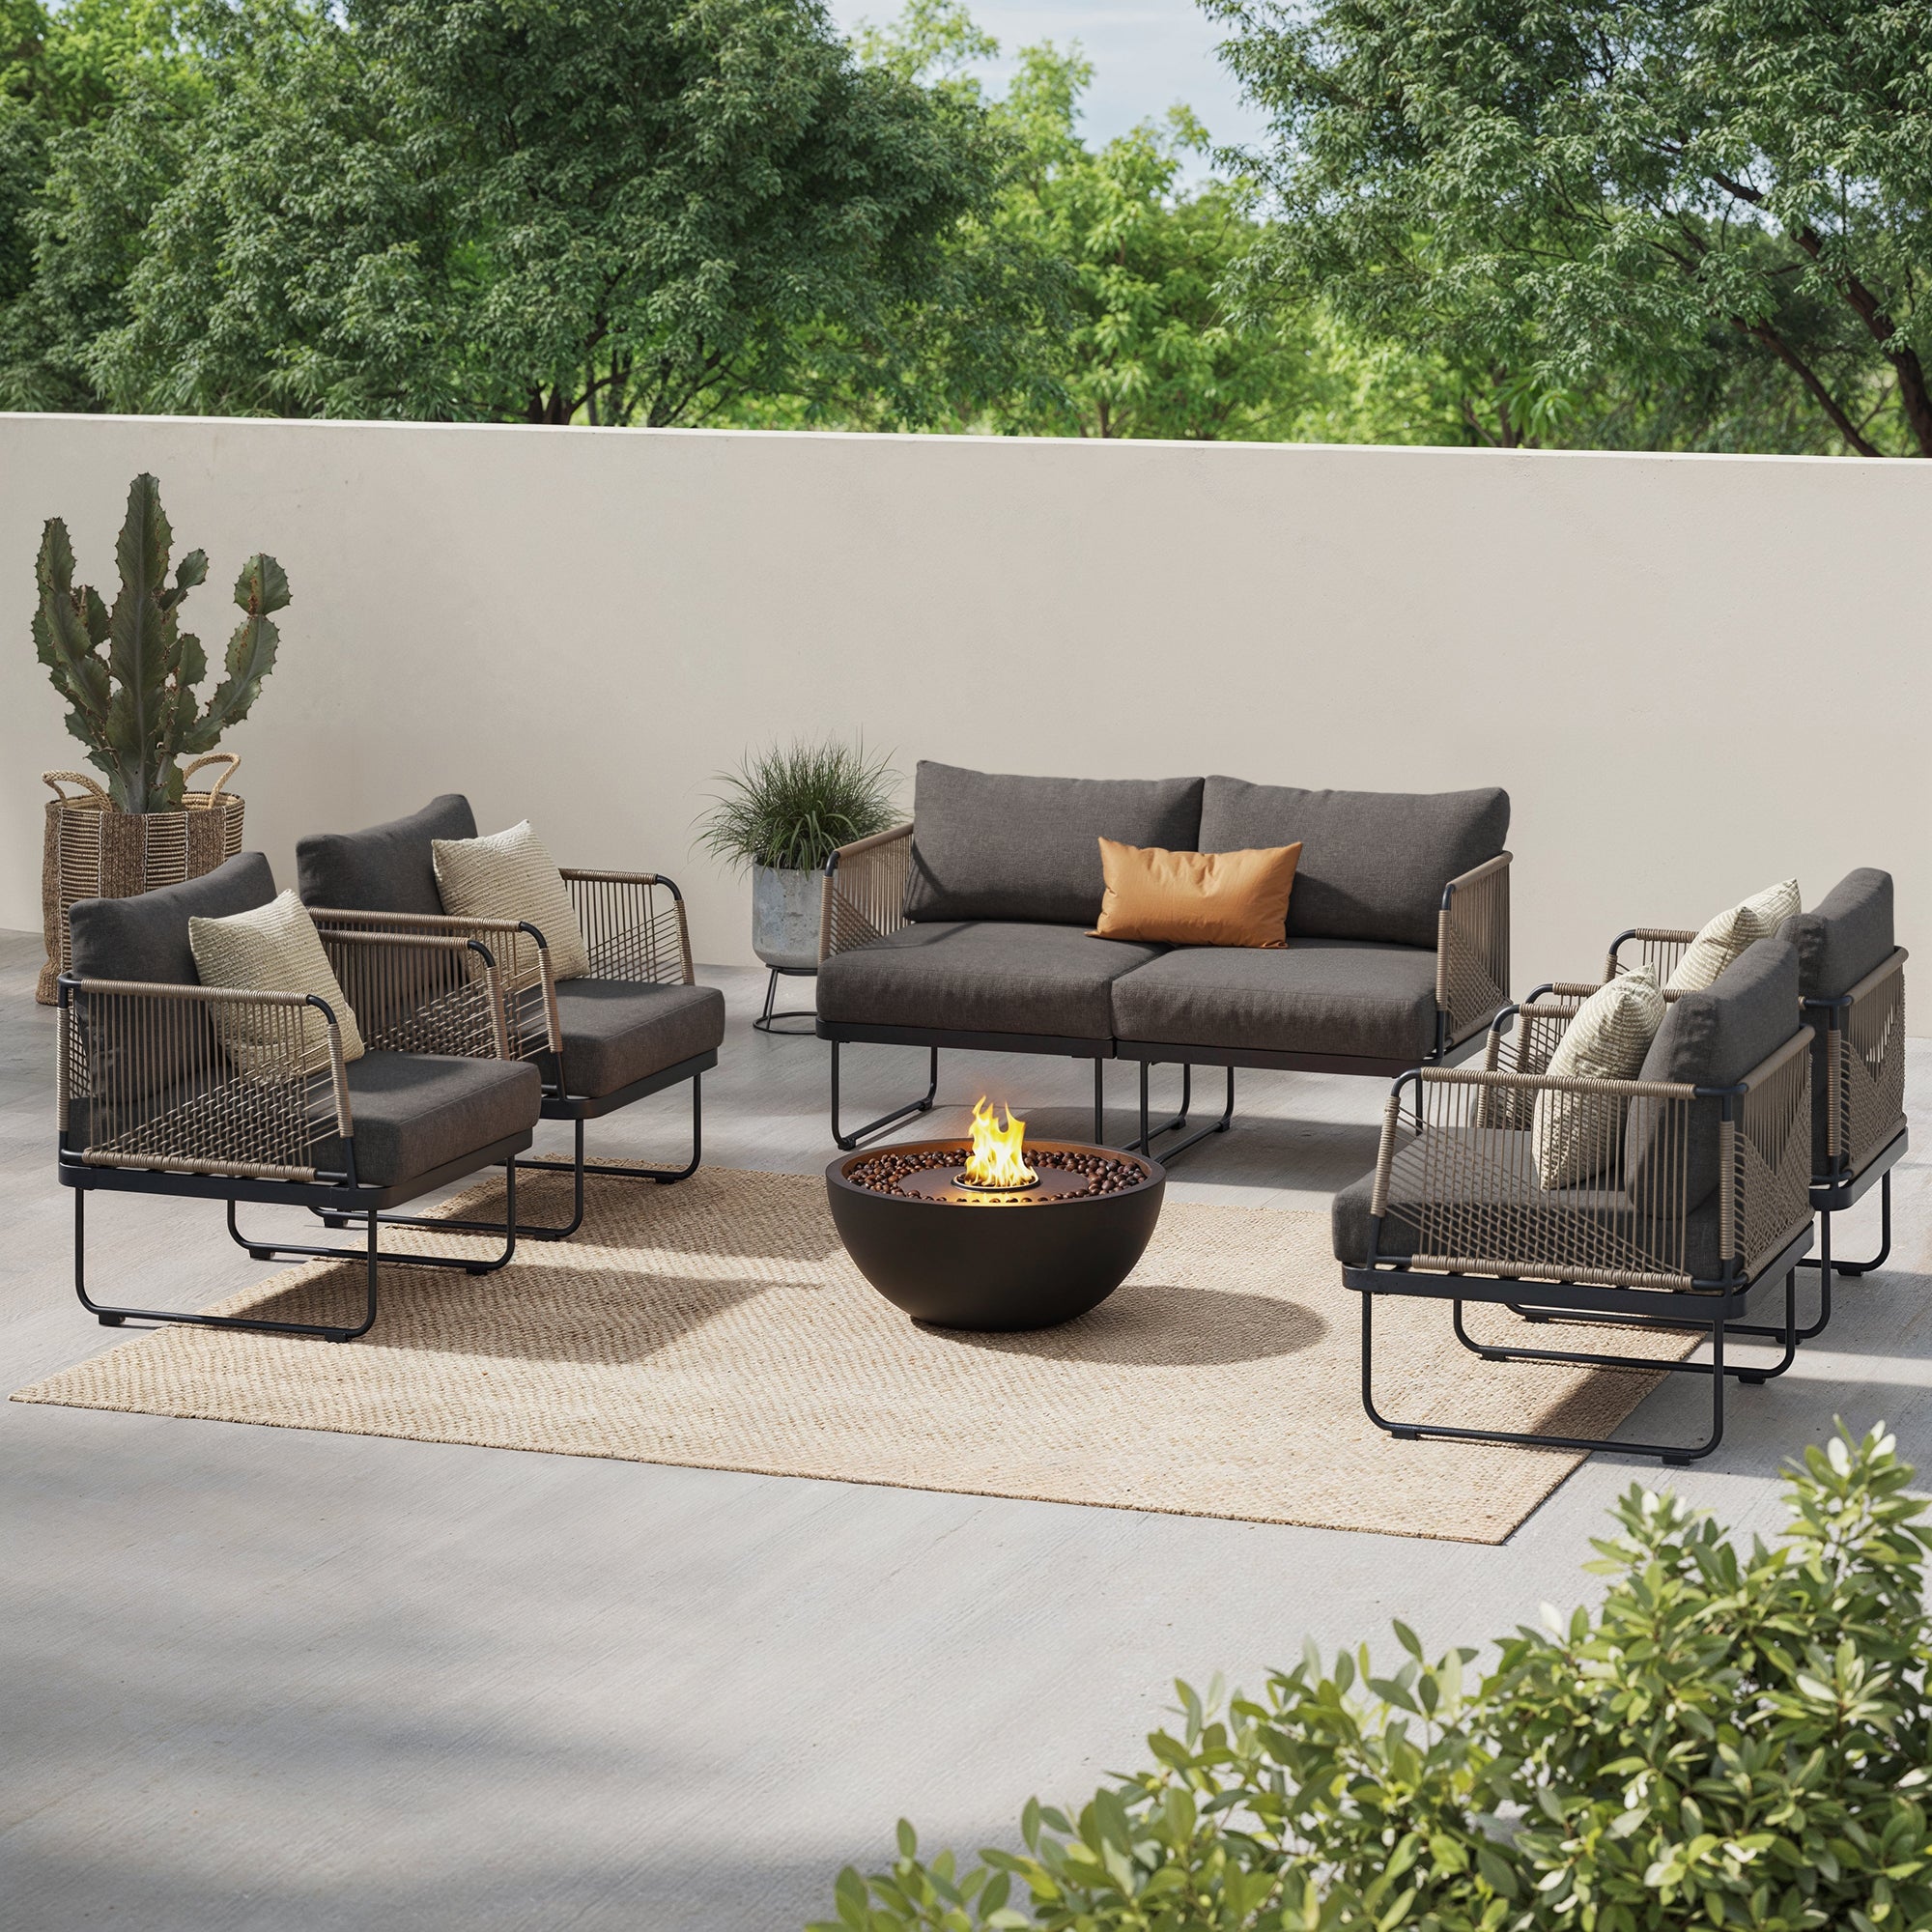 Outdoor Set of 2 Cord Patio Loveseats & 2 Arm Chairs Gray